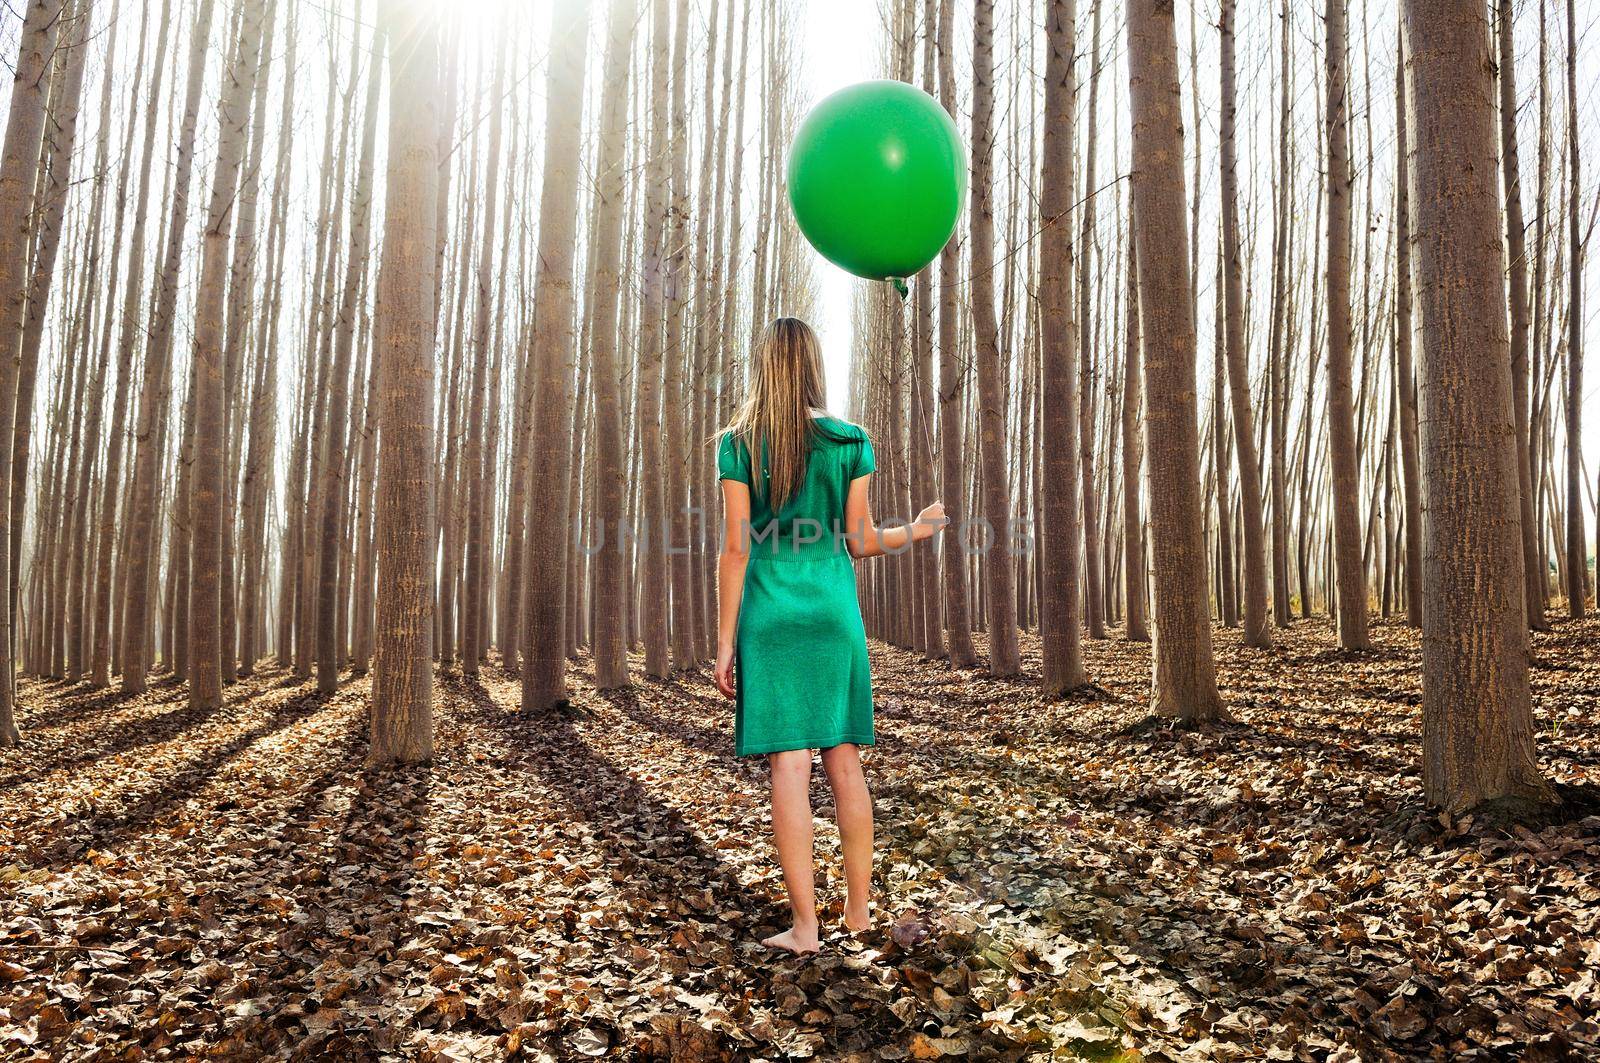 Beautiful blonde girl, dressed in green, standing in the forest